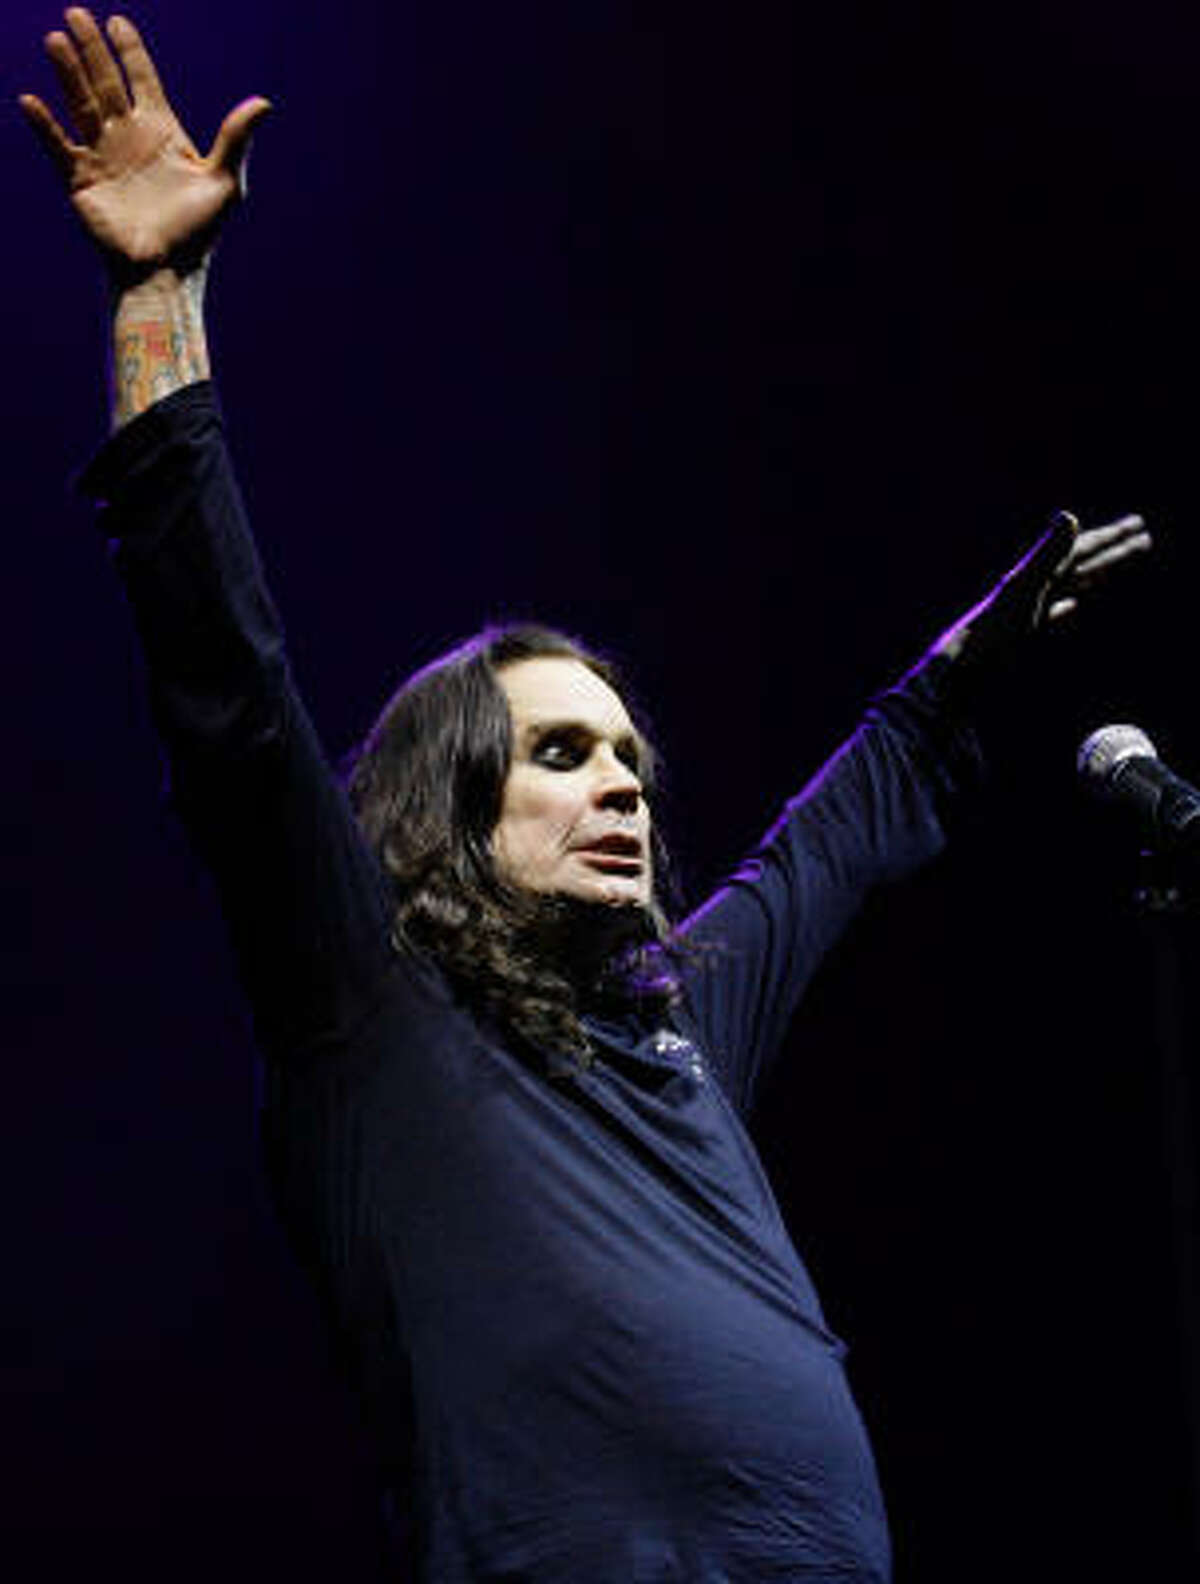 True: Ozzy Osbourne did in fact bite the head off a bat. At a concert in 1982, an audience member threw a bat onstage. Ozzy, not realizing the bat was real, proceeded to bite the animal's head off. There is still debate as to whether the bat was alive or dead when thrown on the stage, but really - does it matter? Osbourne had to get a series of rabies shots.